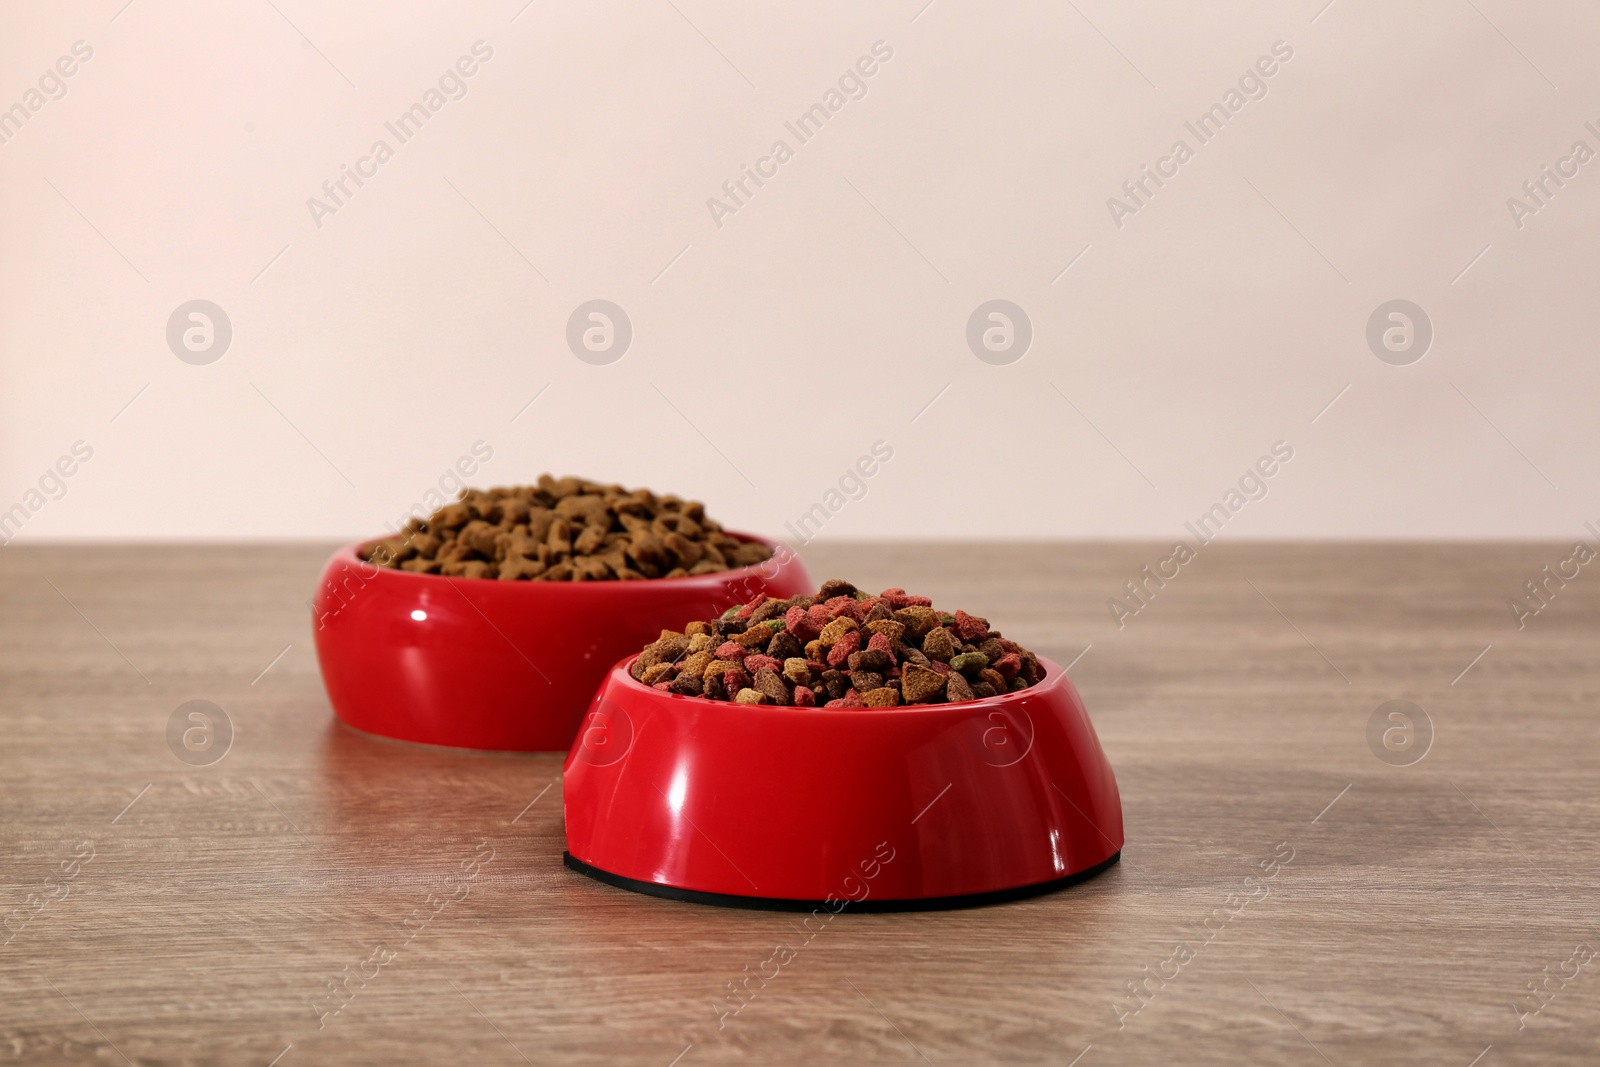 Photo of Dry food in red pet bowls on wooden surface